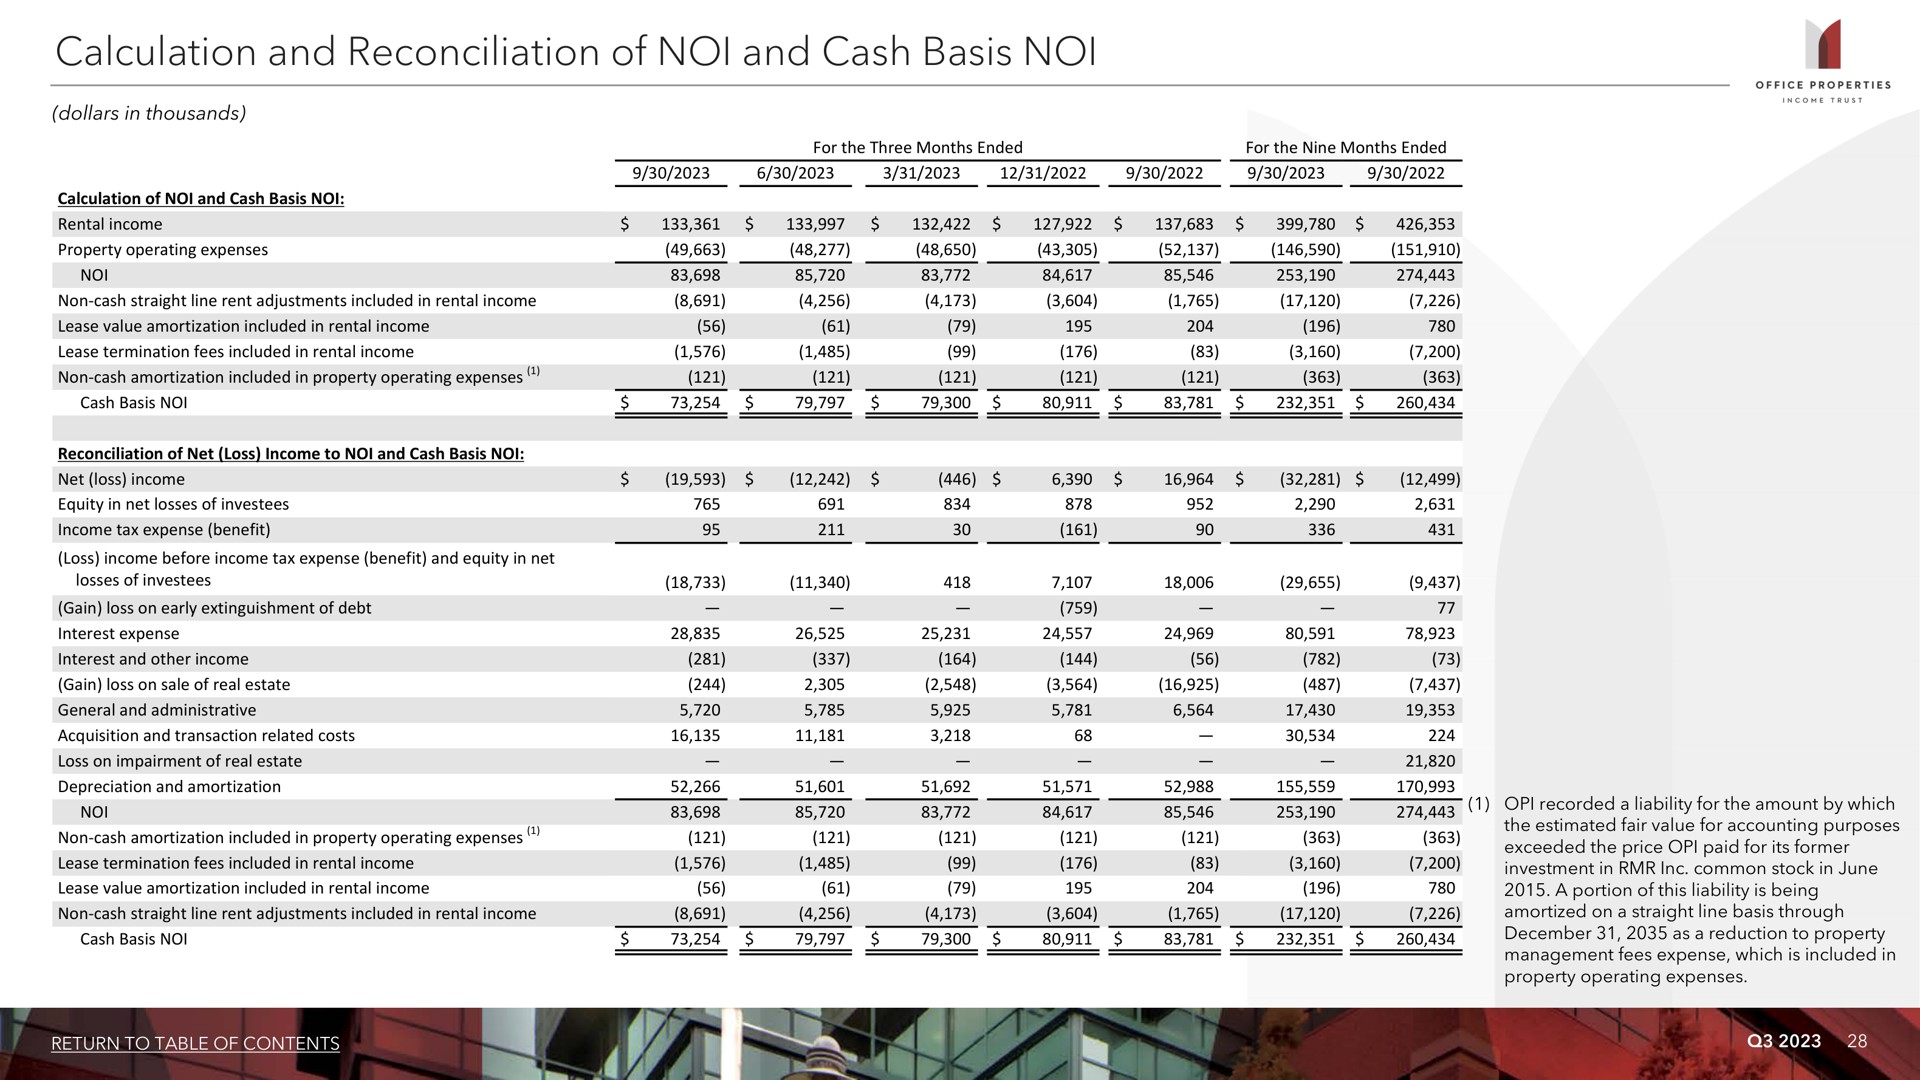 calculation and reconciliation of and cash basis i | Office Properties Income Trust